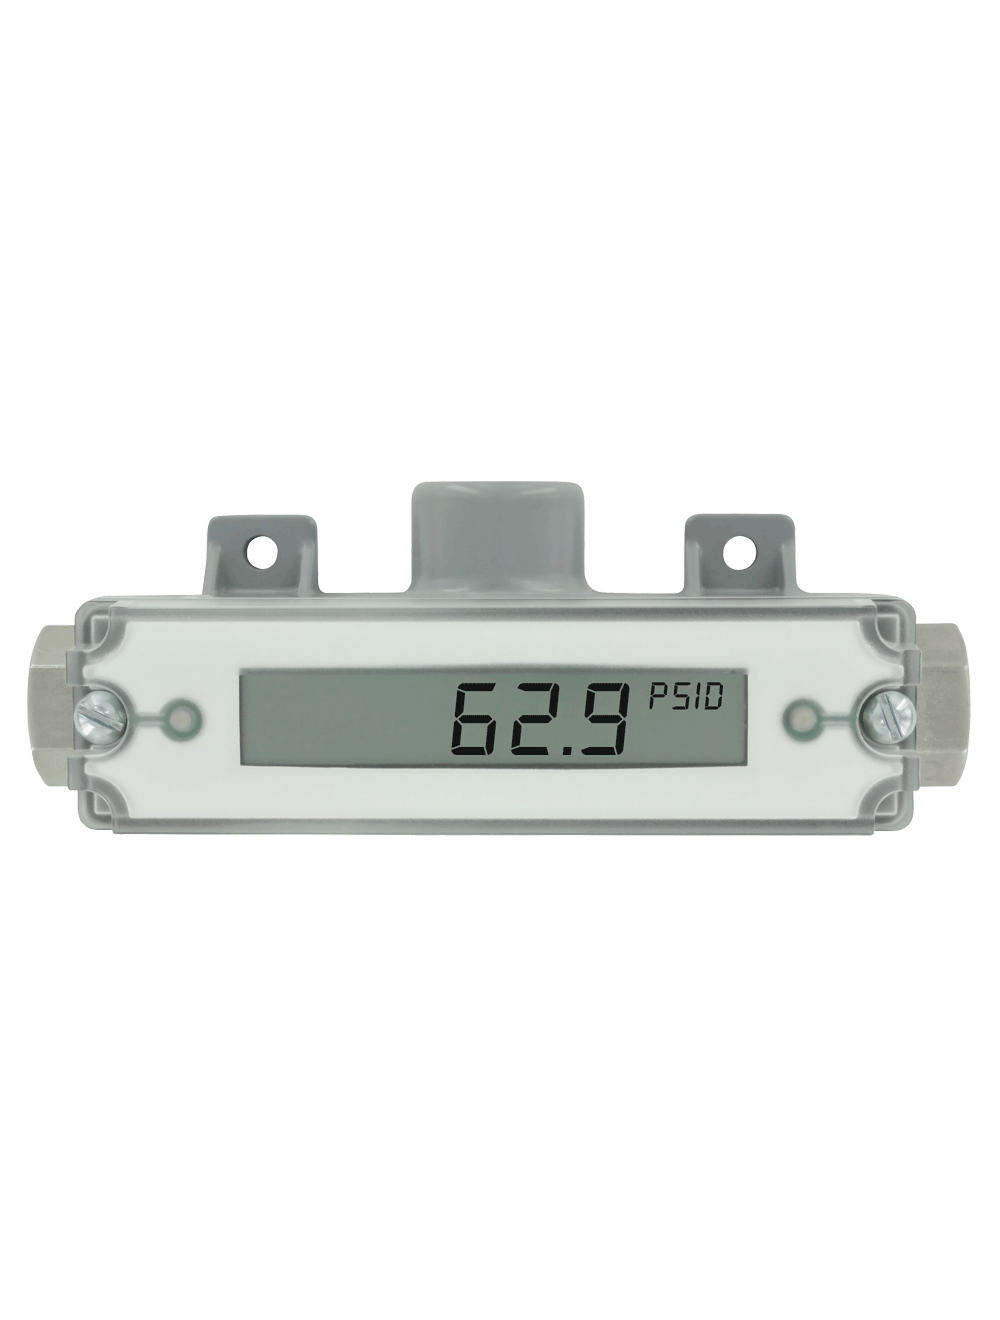 Conduit Connection Dwyer Series 629 Wet/Wet Differential Pressure Transmitter 4-20 mA Electrical Output 0-100 psid Range 1/4 Female NPT Conduit Housing 